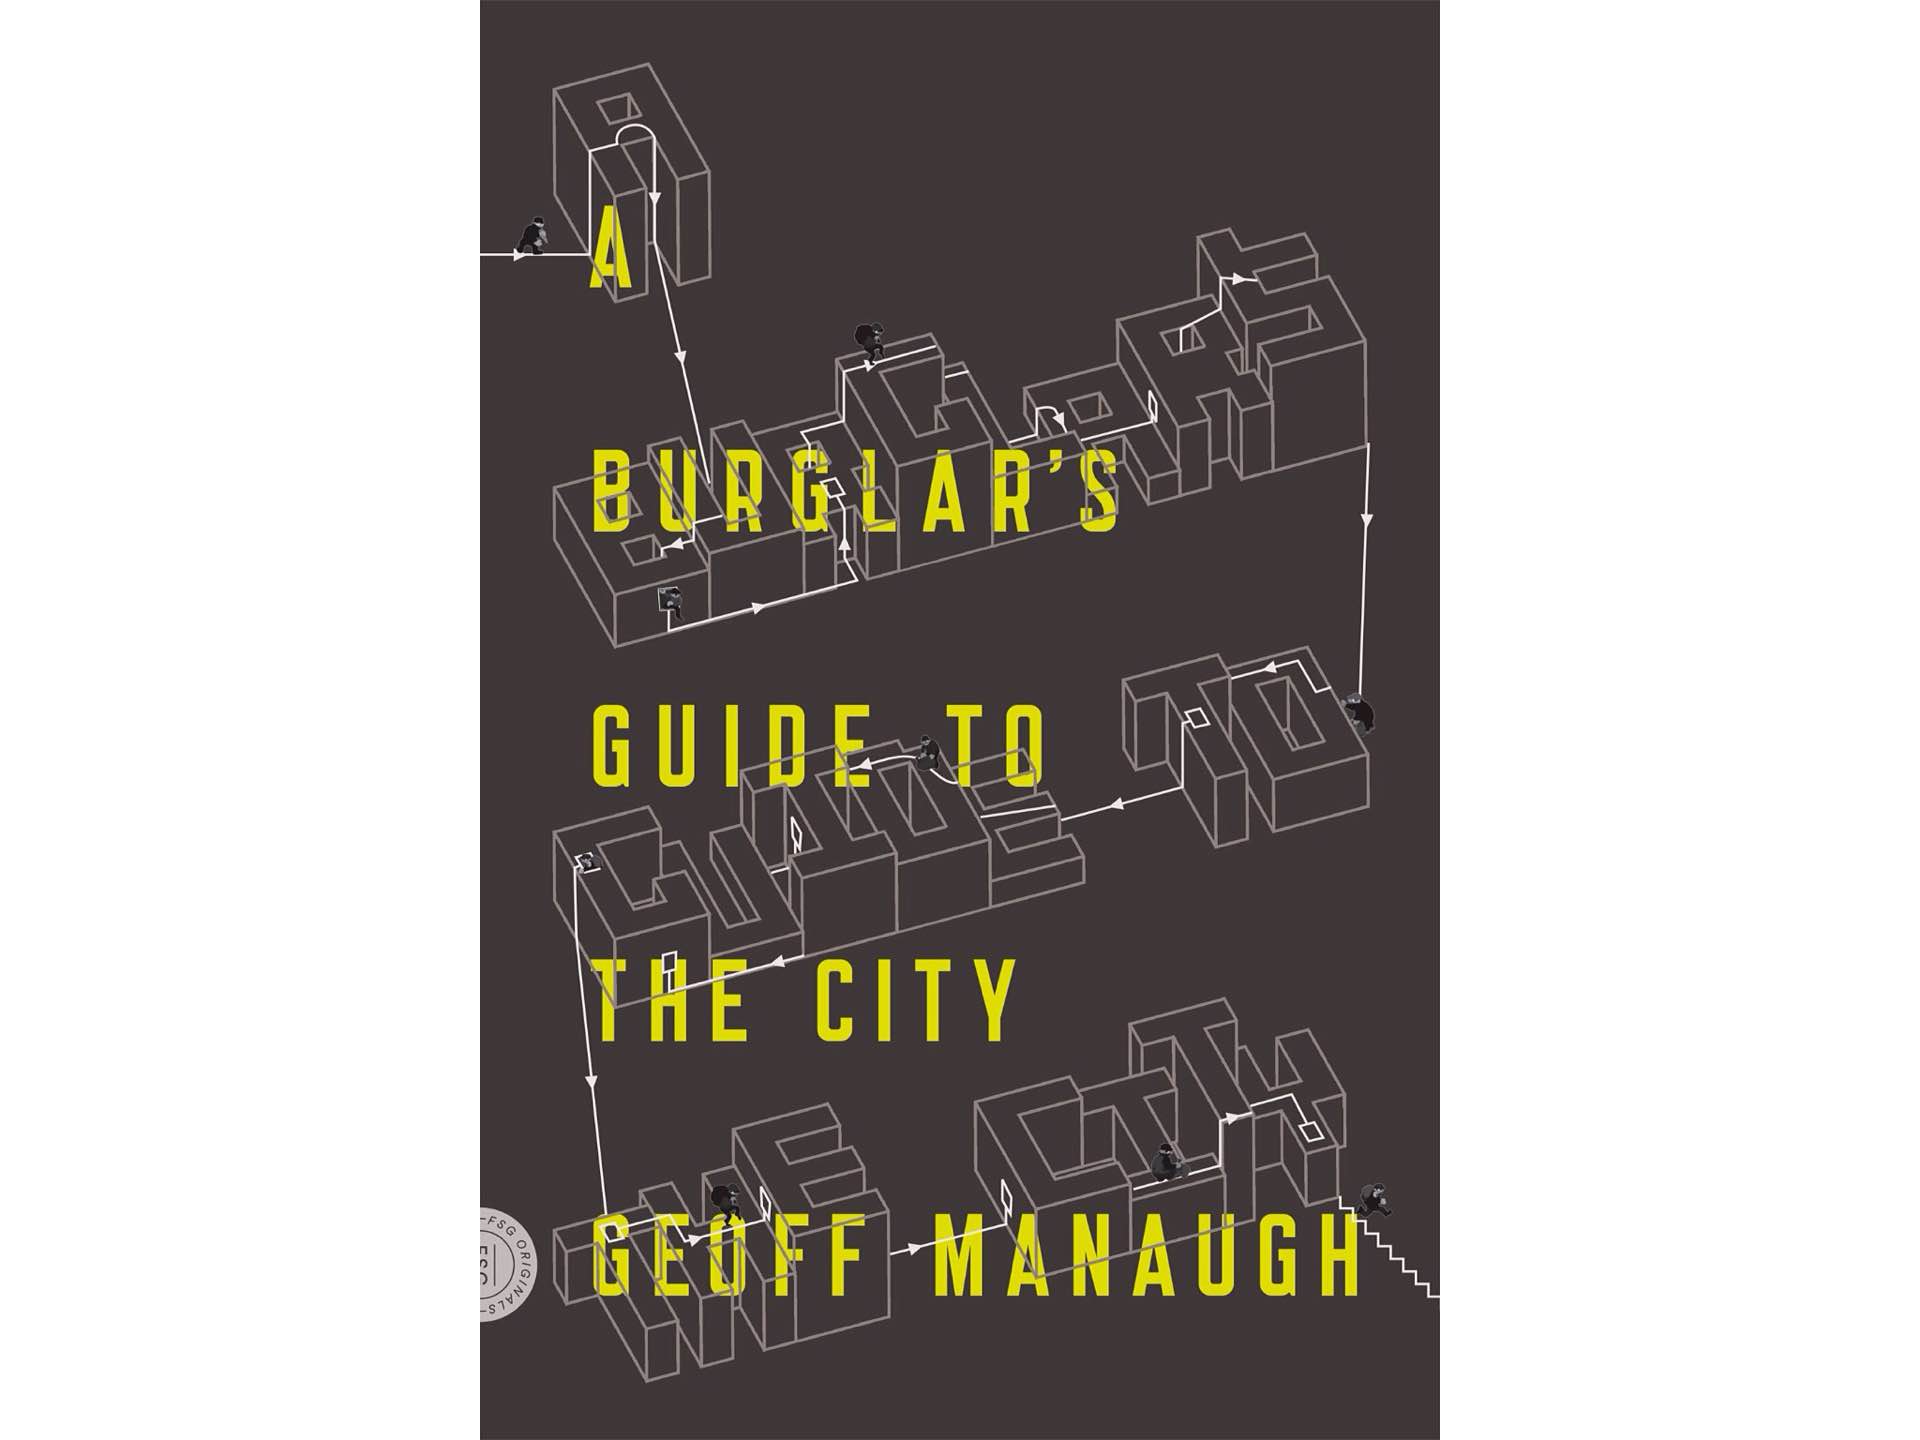 A Burglar's Guide to the City by Geoff Manaugh.